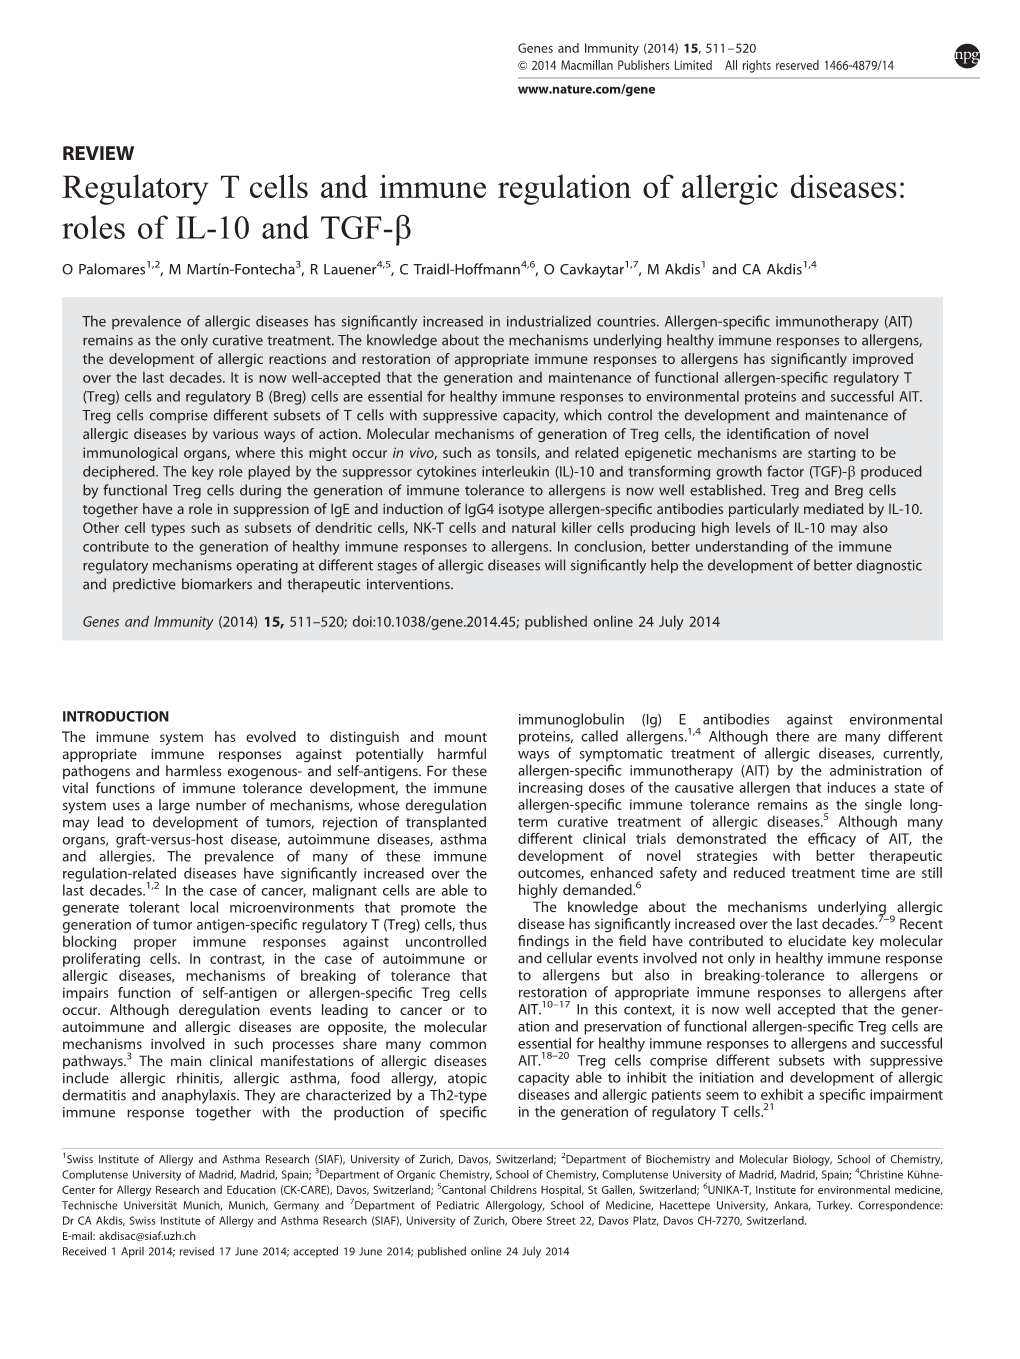 Regulatory T Cells and Immune Regulation of Allergic Diseases: Roles of IL-10 and TGF-B